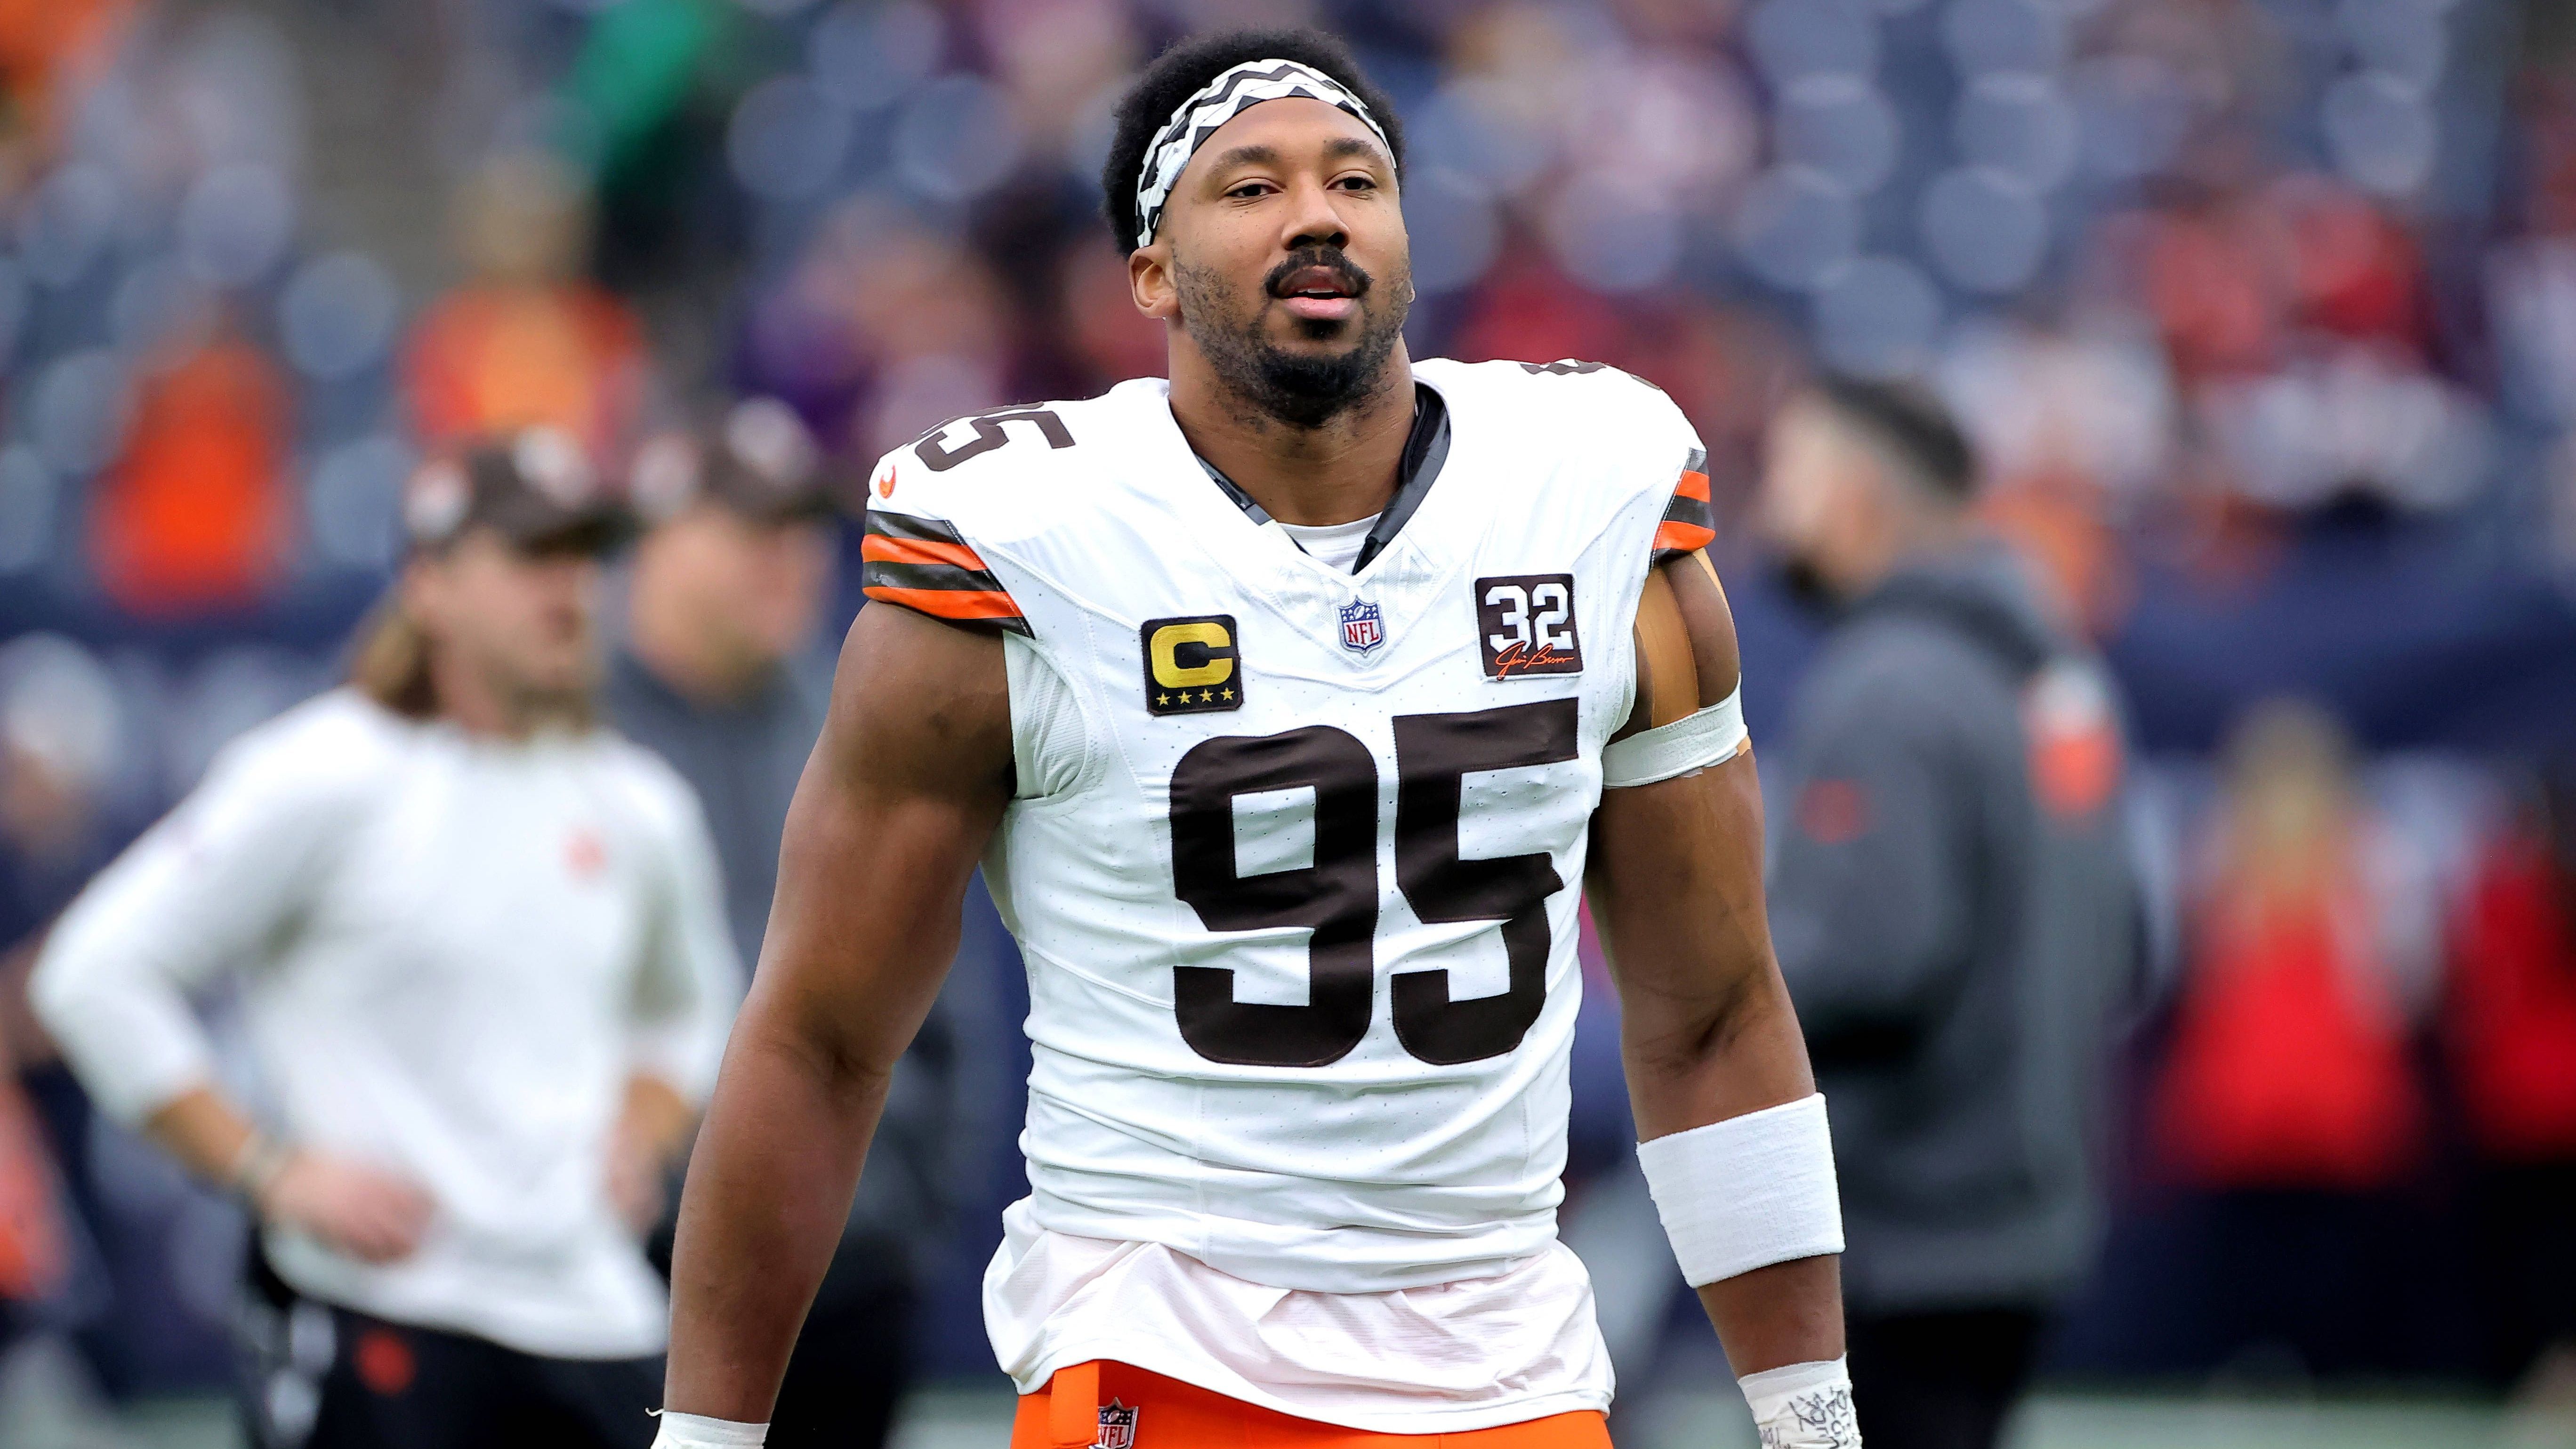 <strong>Defensive Player of the Year</strong> <br>Myles Garrett, Cleveland Browns, Defensive End<br><strong>Wahlergebnis mit Punkteabstufung 5-3-1:</strong> <br>1. Garrett, 23-13-11 = 165<br>2. TJ Watt, Outside Linebacker, Steelers, 19-11-12 = 140<br>3. Micah Parsons, Linebacker, Cowboys, 7-16-6 = 89<br>4. Maxx Crosby, Defensive End, Raiders, 0-5-6 = 21<br>5. DaRon Bland, Cornerback, Cowboys, 1-2-3 = 14